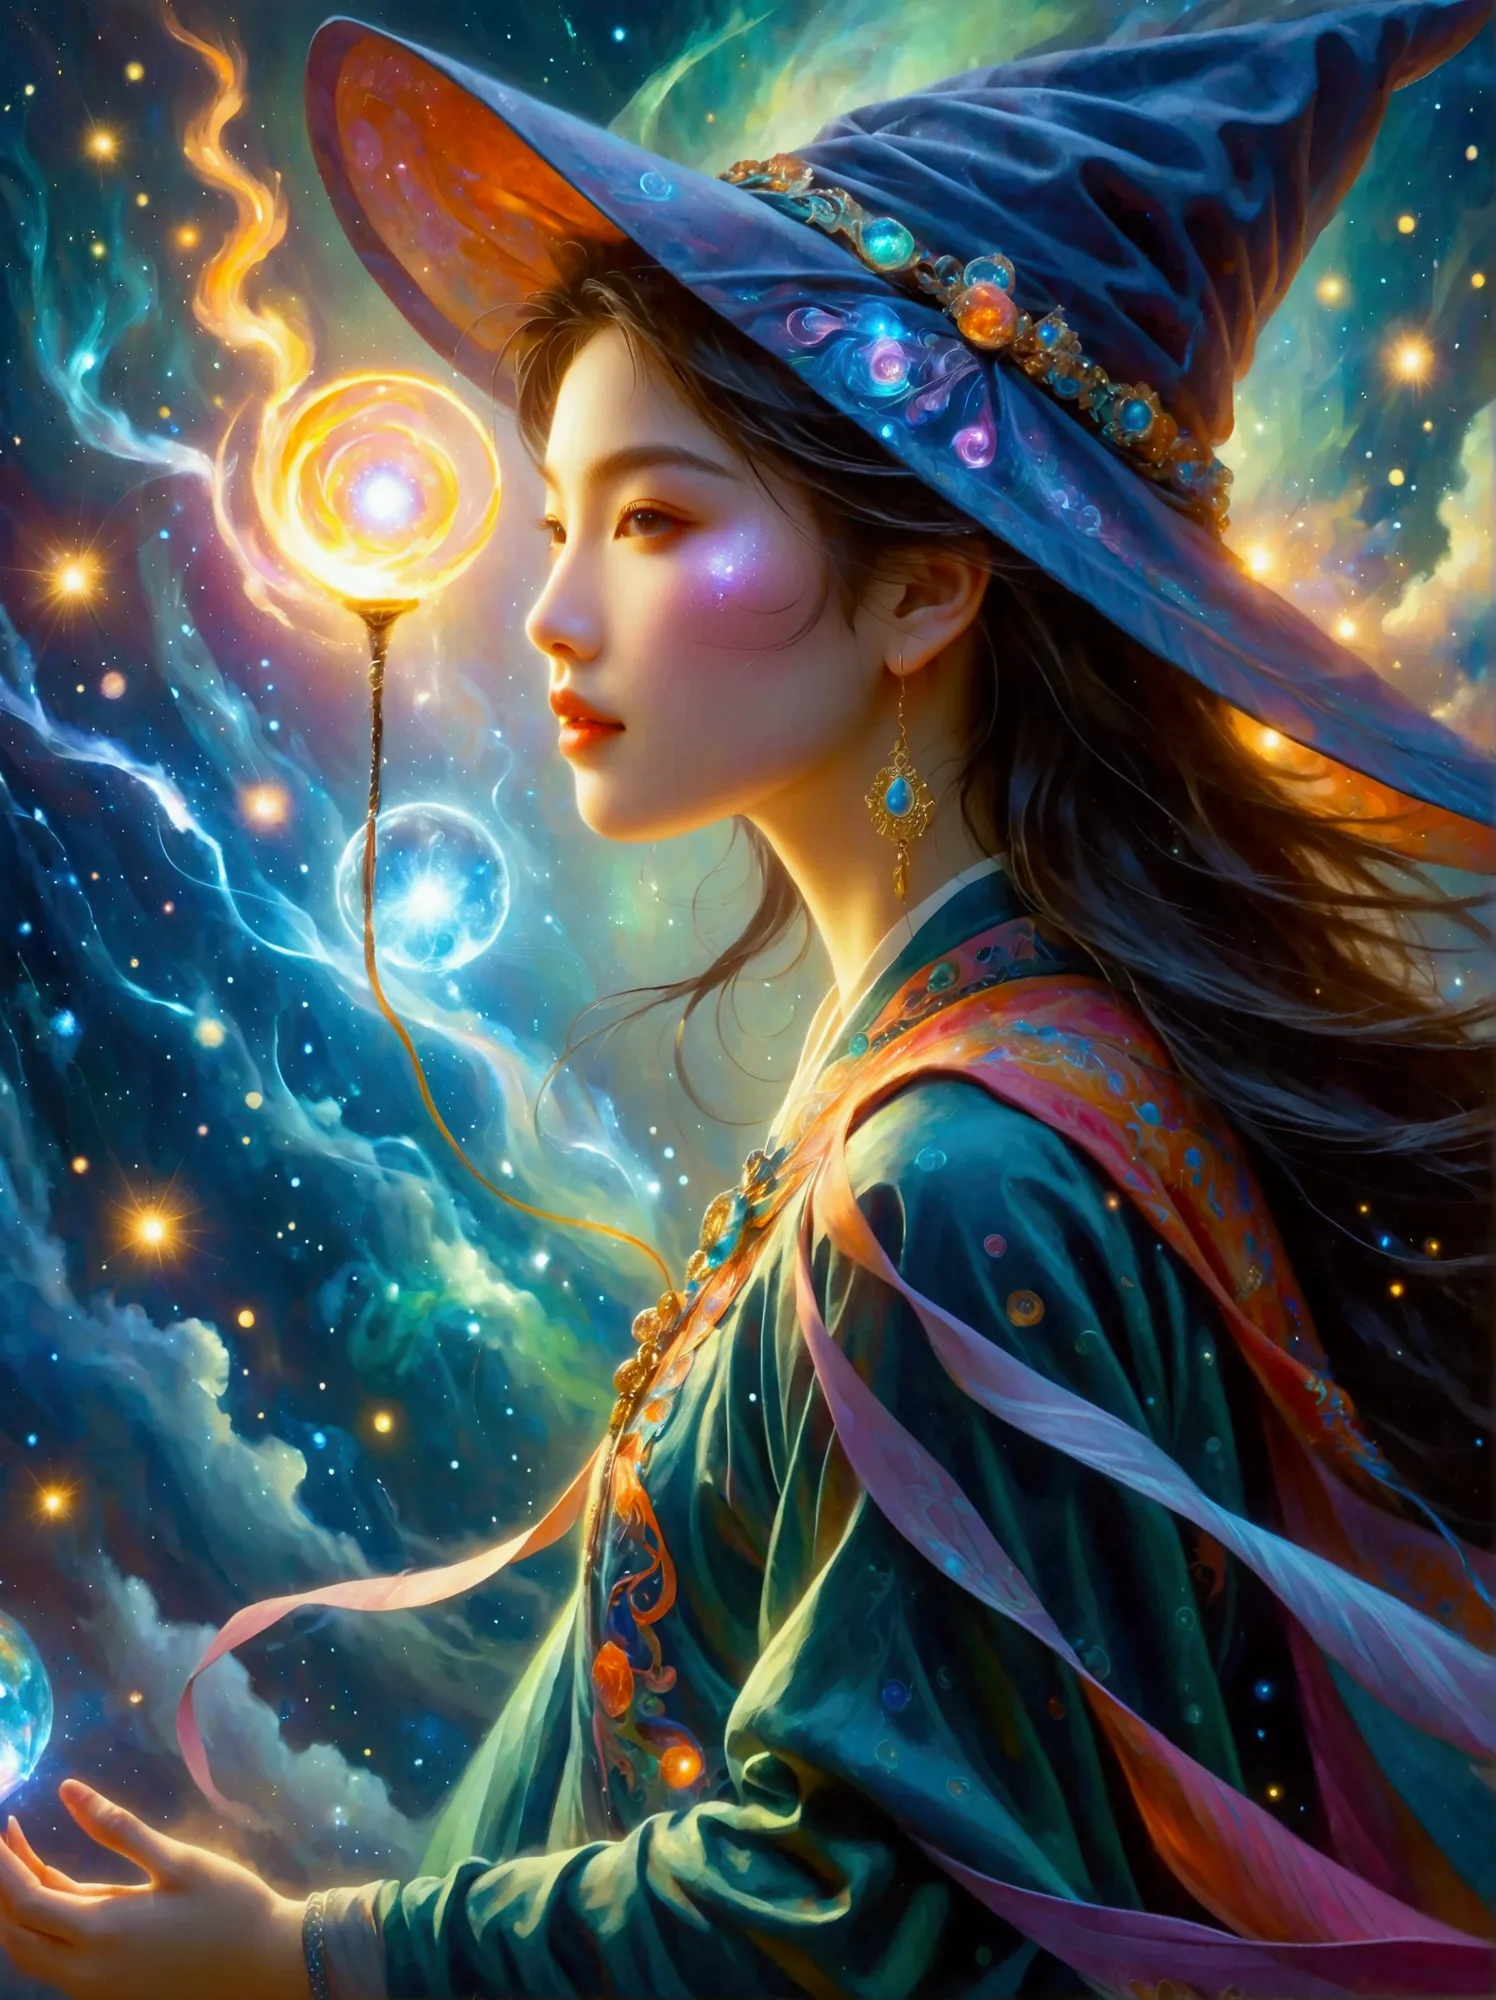 An imaginative scene depicting a youthful female sorceress of East Asian descent, named My. She is powerfully invoking magical spells with her eyes sparkling with arcane energy. Her enchantments are birthing a fresh, ethereal realm. The realm manifests as ...